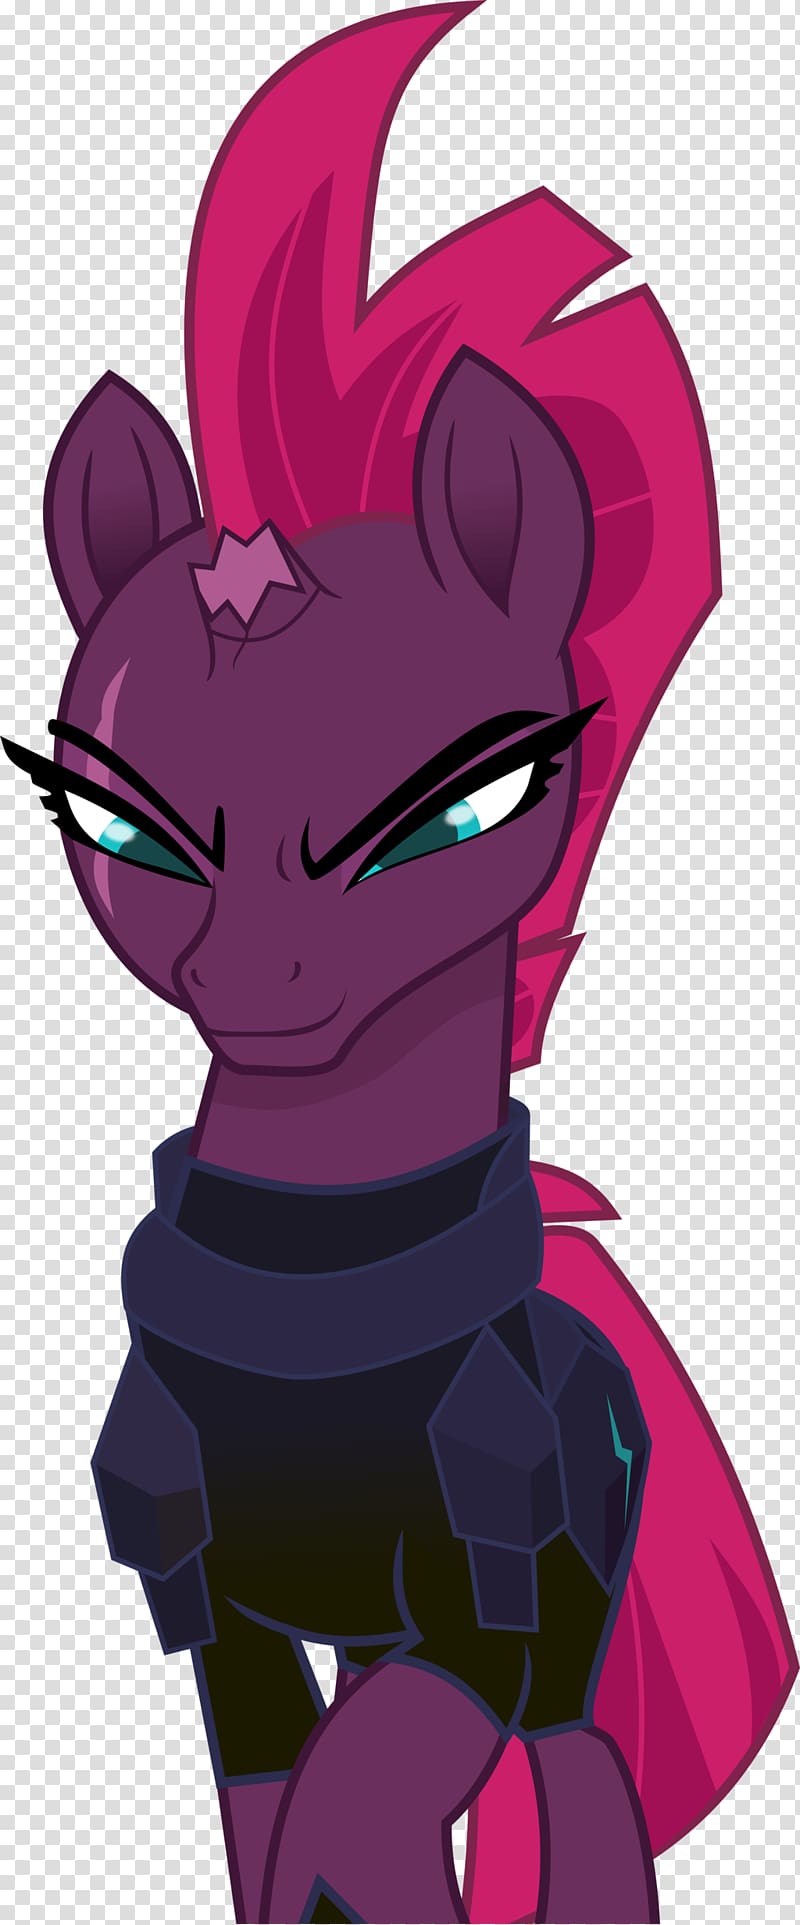 Twilight Sparkle Tempest Shadow Pony The Storm King , reads transparent background PNG clipart